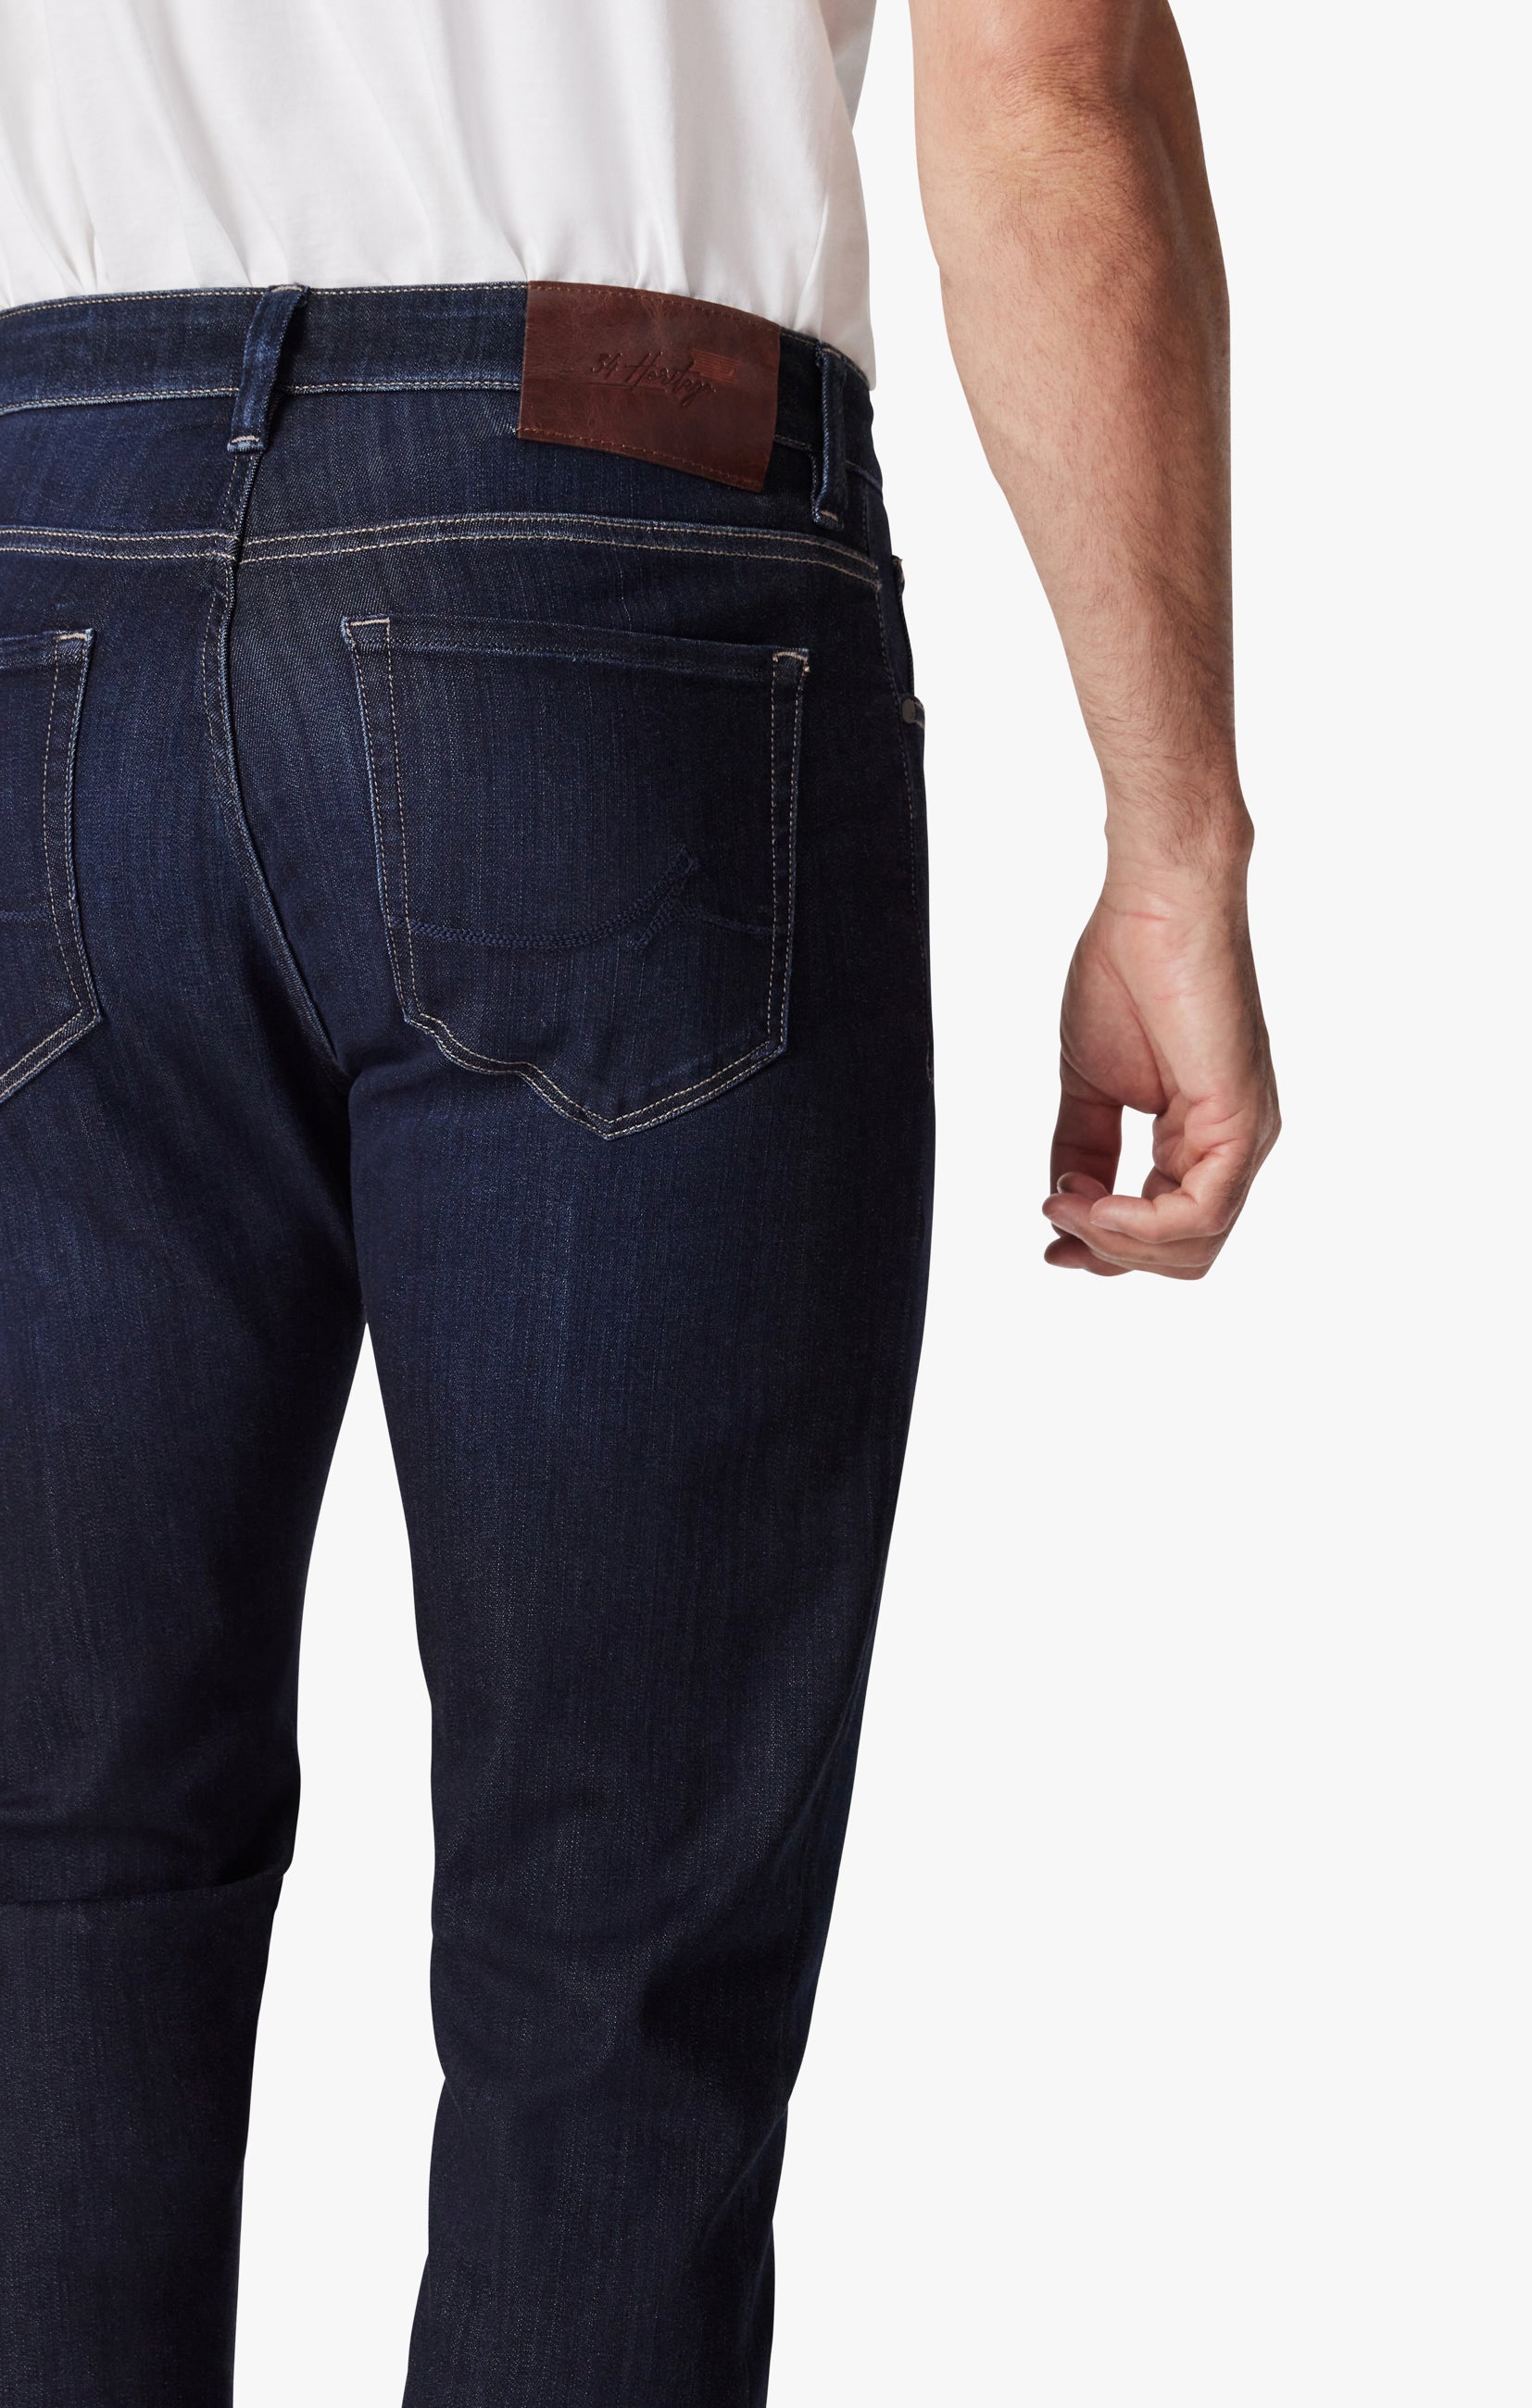 Champ Athletic Fit Jeans in Deep Refined Image 7